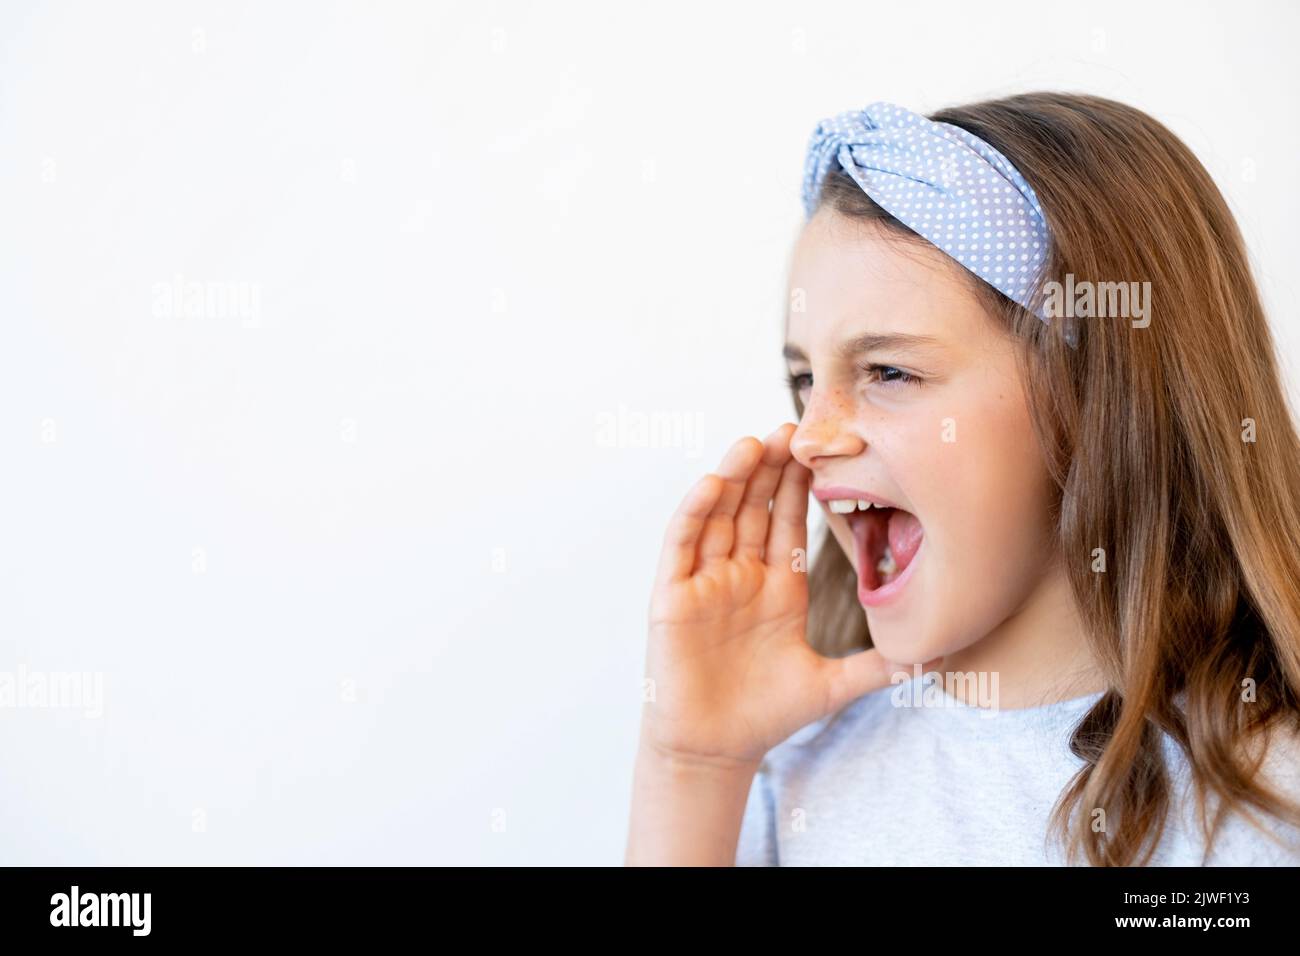 child announcement excited small girl shouting Stock Photo